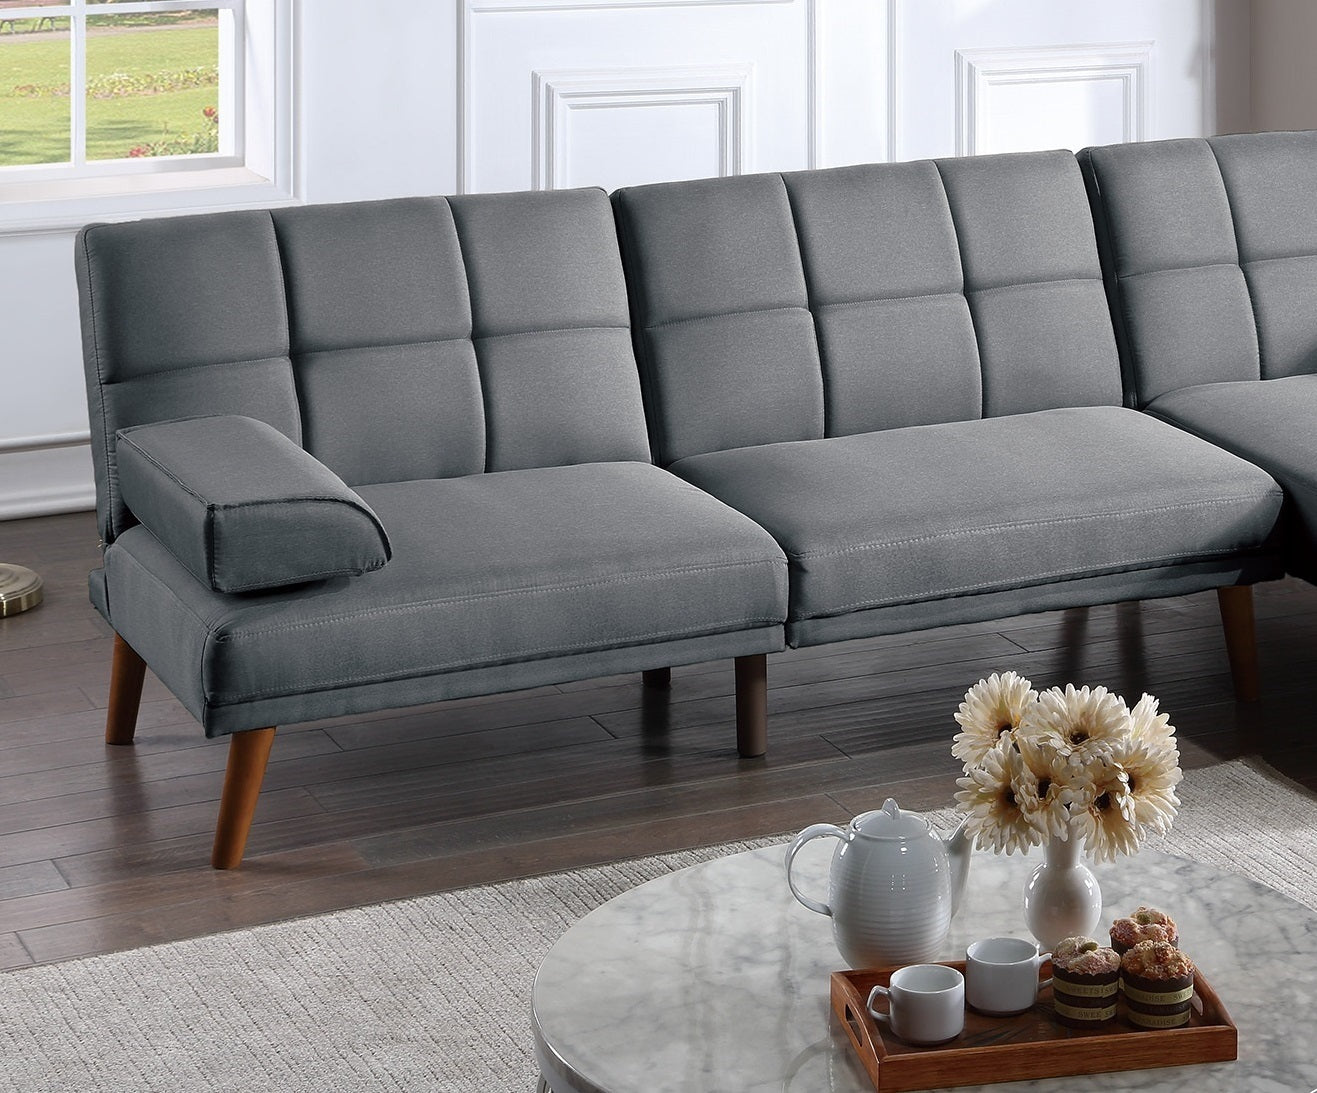 BASIT Collection Blue Grey Polyfiber Adjustable Tufted Sofa Living Room Solid wood Legs Comfort Couch